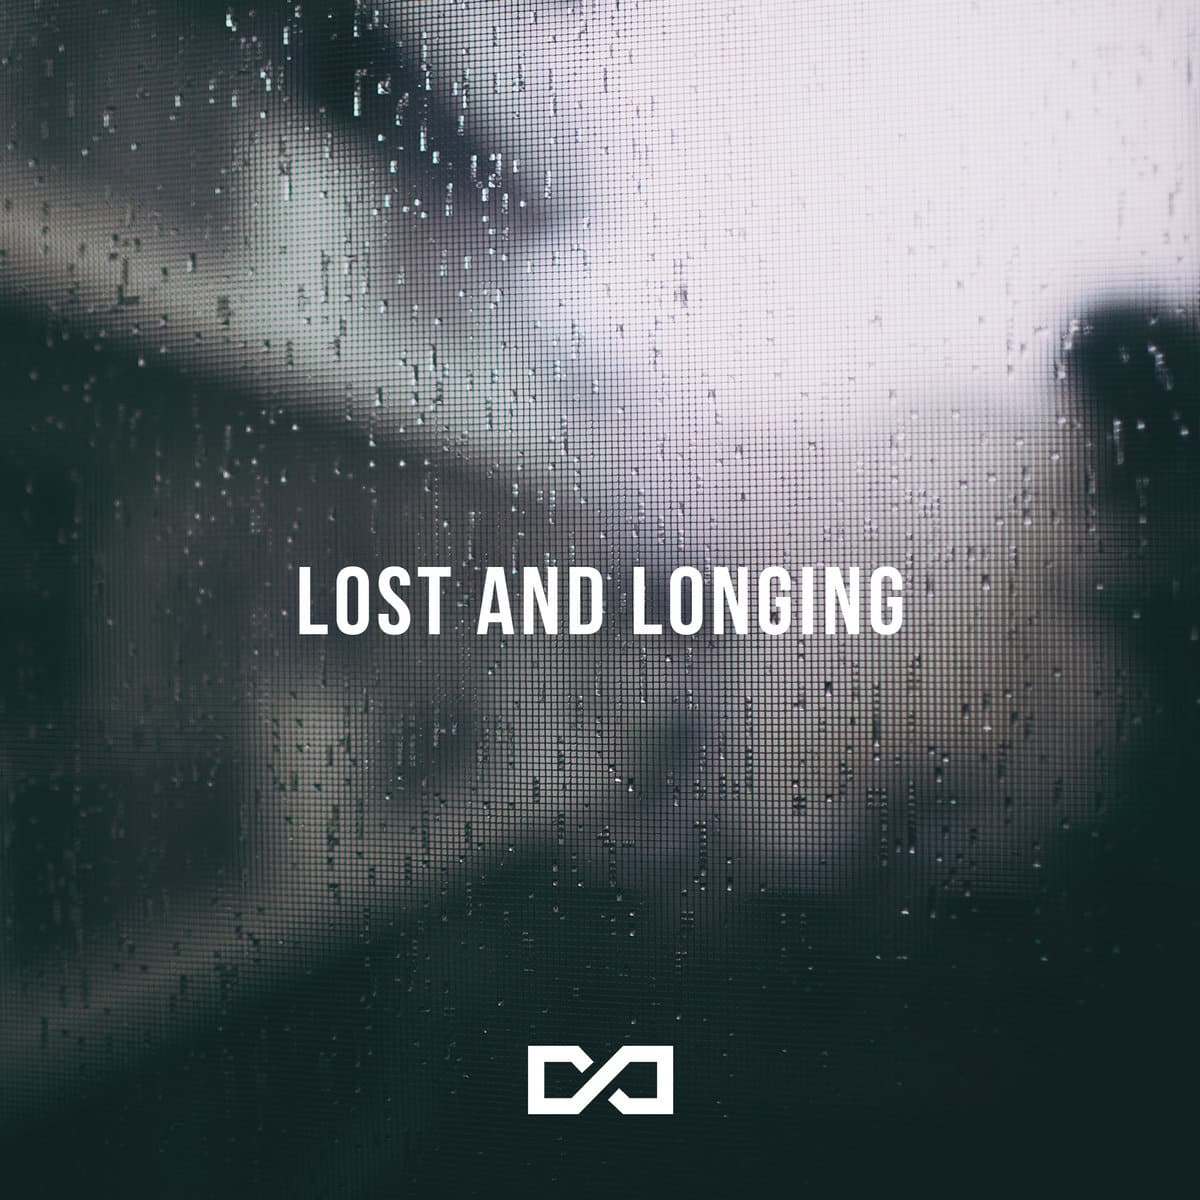 Lost and Longing